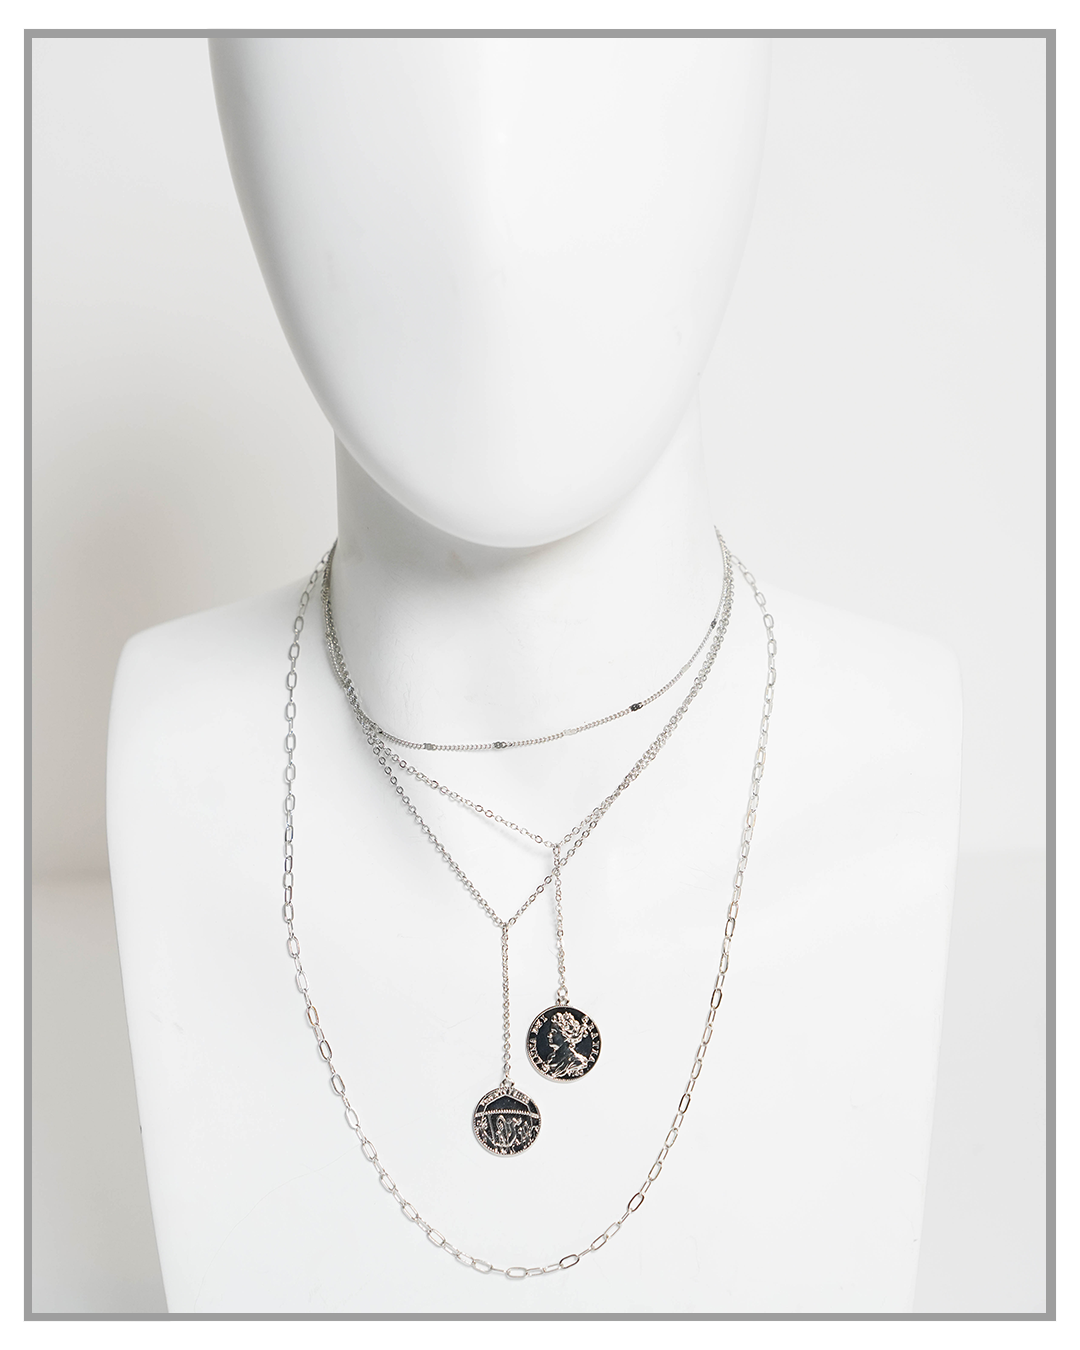 Twin Coin Pendant 4-Layered Necklace - truthBlack